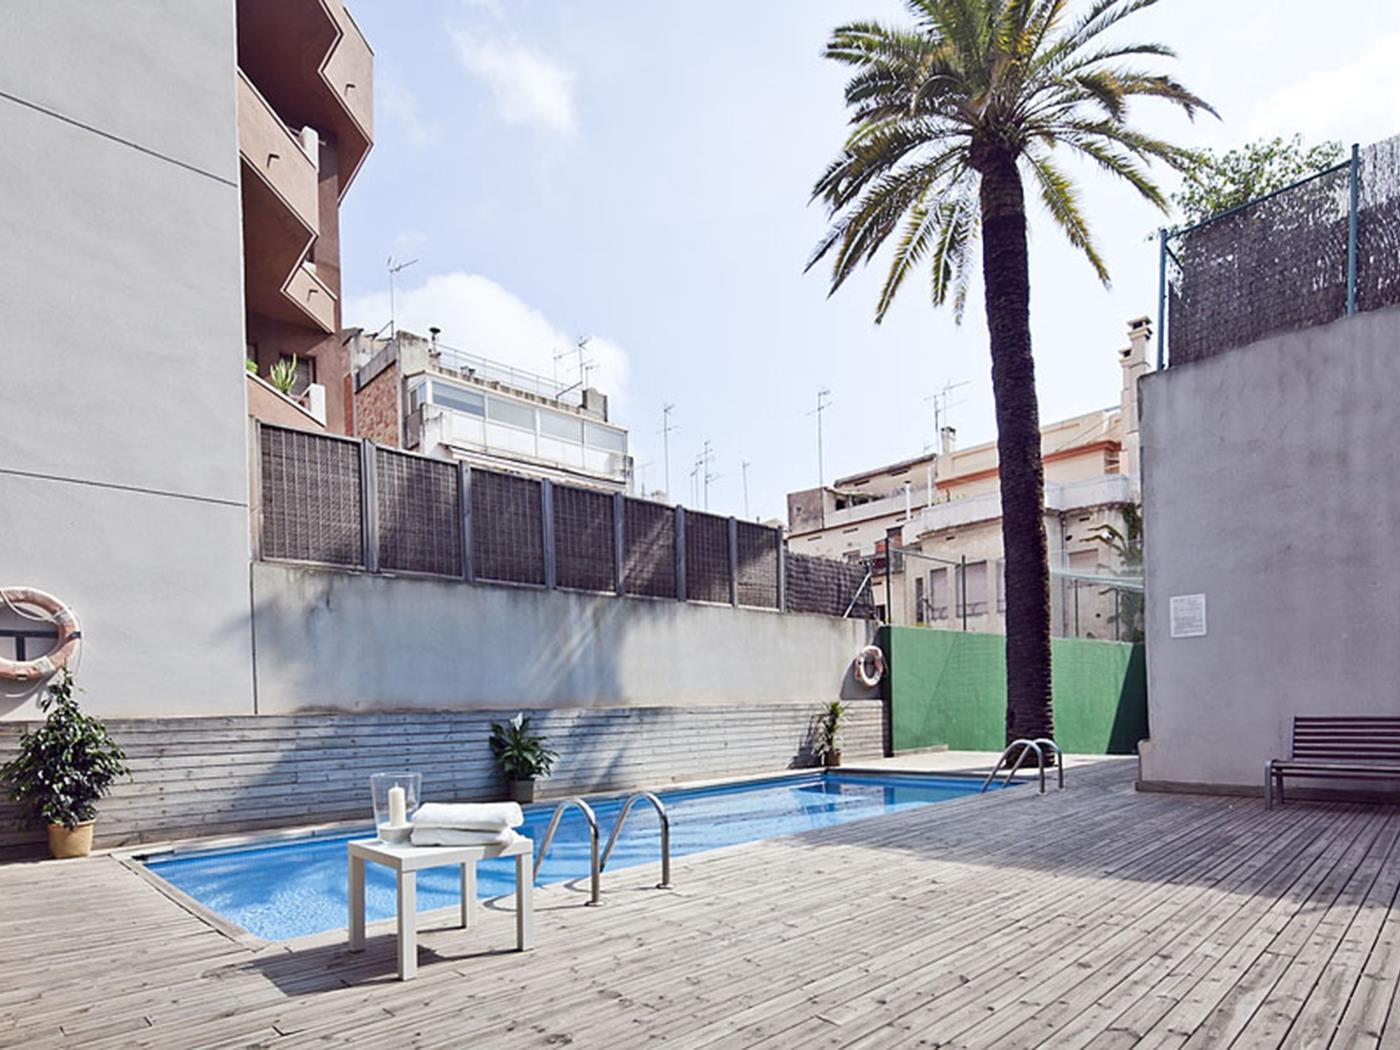 Apartments for rent for Erasmus very close to the centre of Barcelona wt terrace - My Space Barcelona Apartments